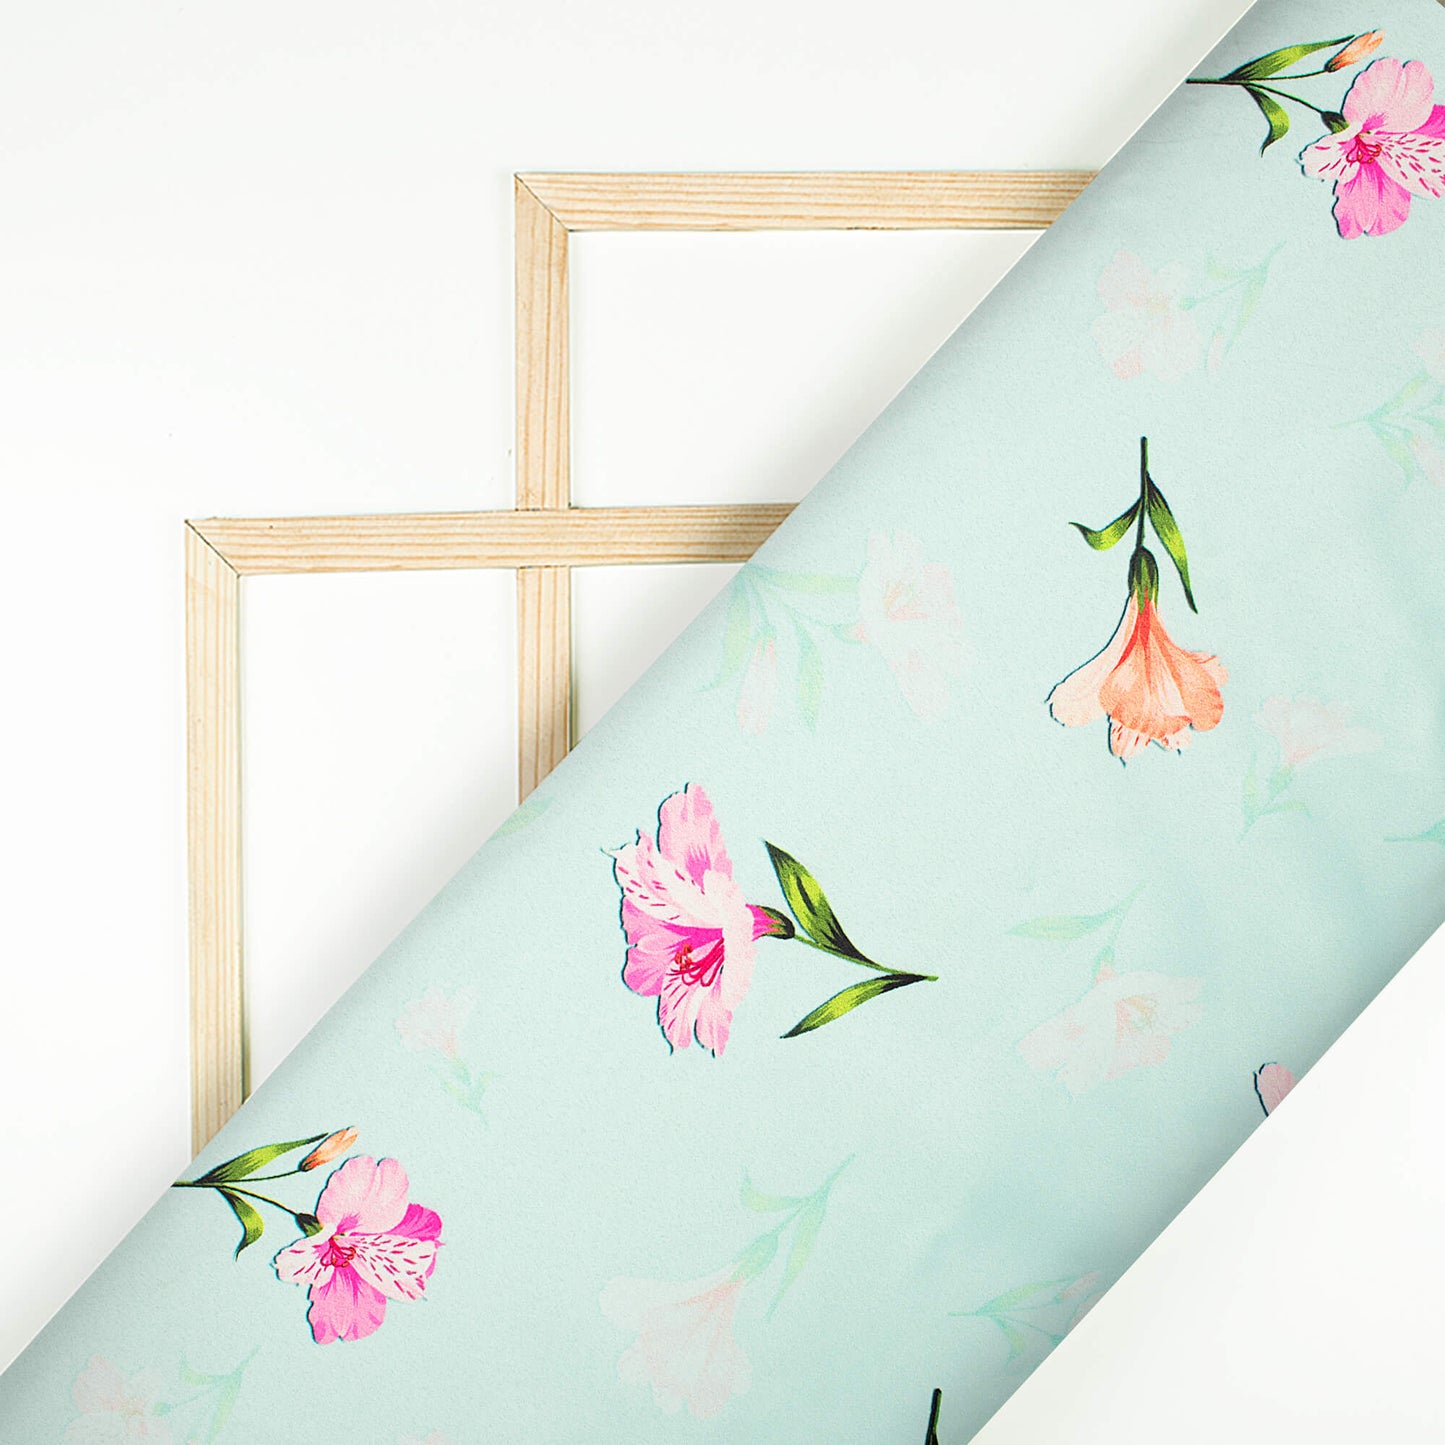 Pale Blue And Taffy Pink Floral Pattern Digital Print Charmeuse Satin Fabric (Width 58 Inches)